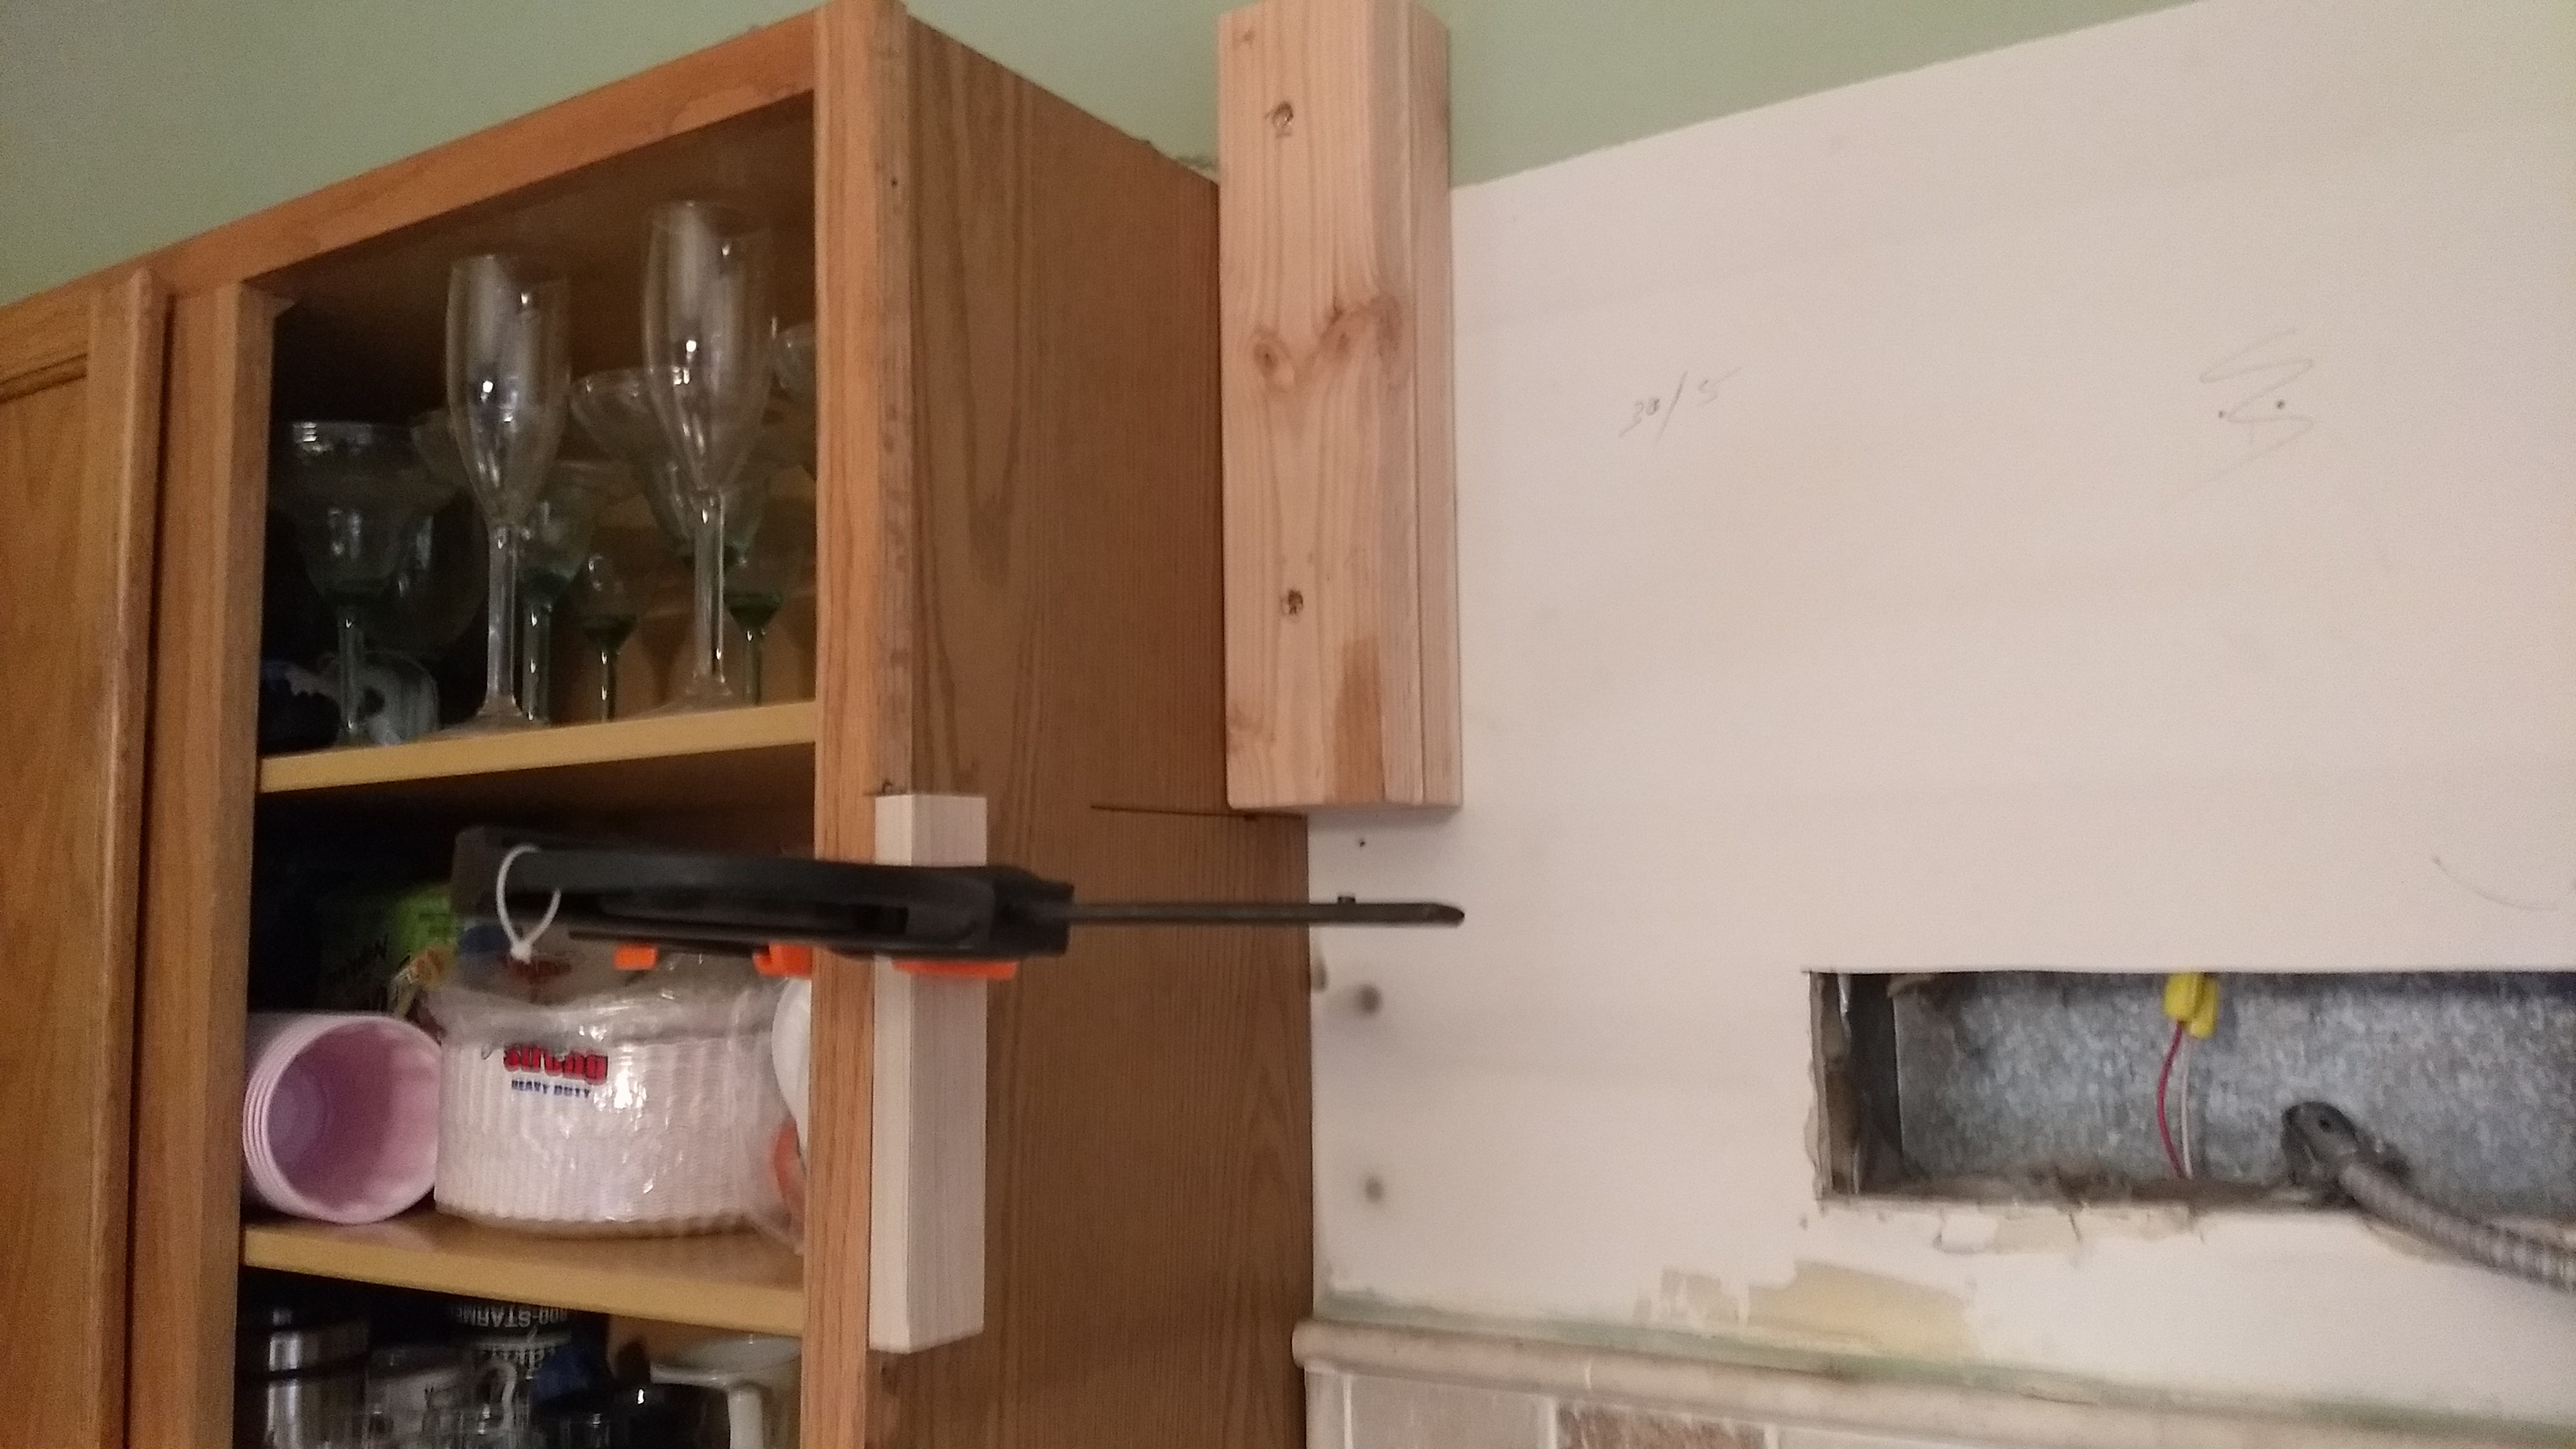 Step 3: Since I am moving the cabinet both up and out, I mounted 3" spacer blocks to the wall studs